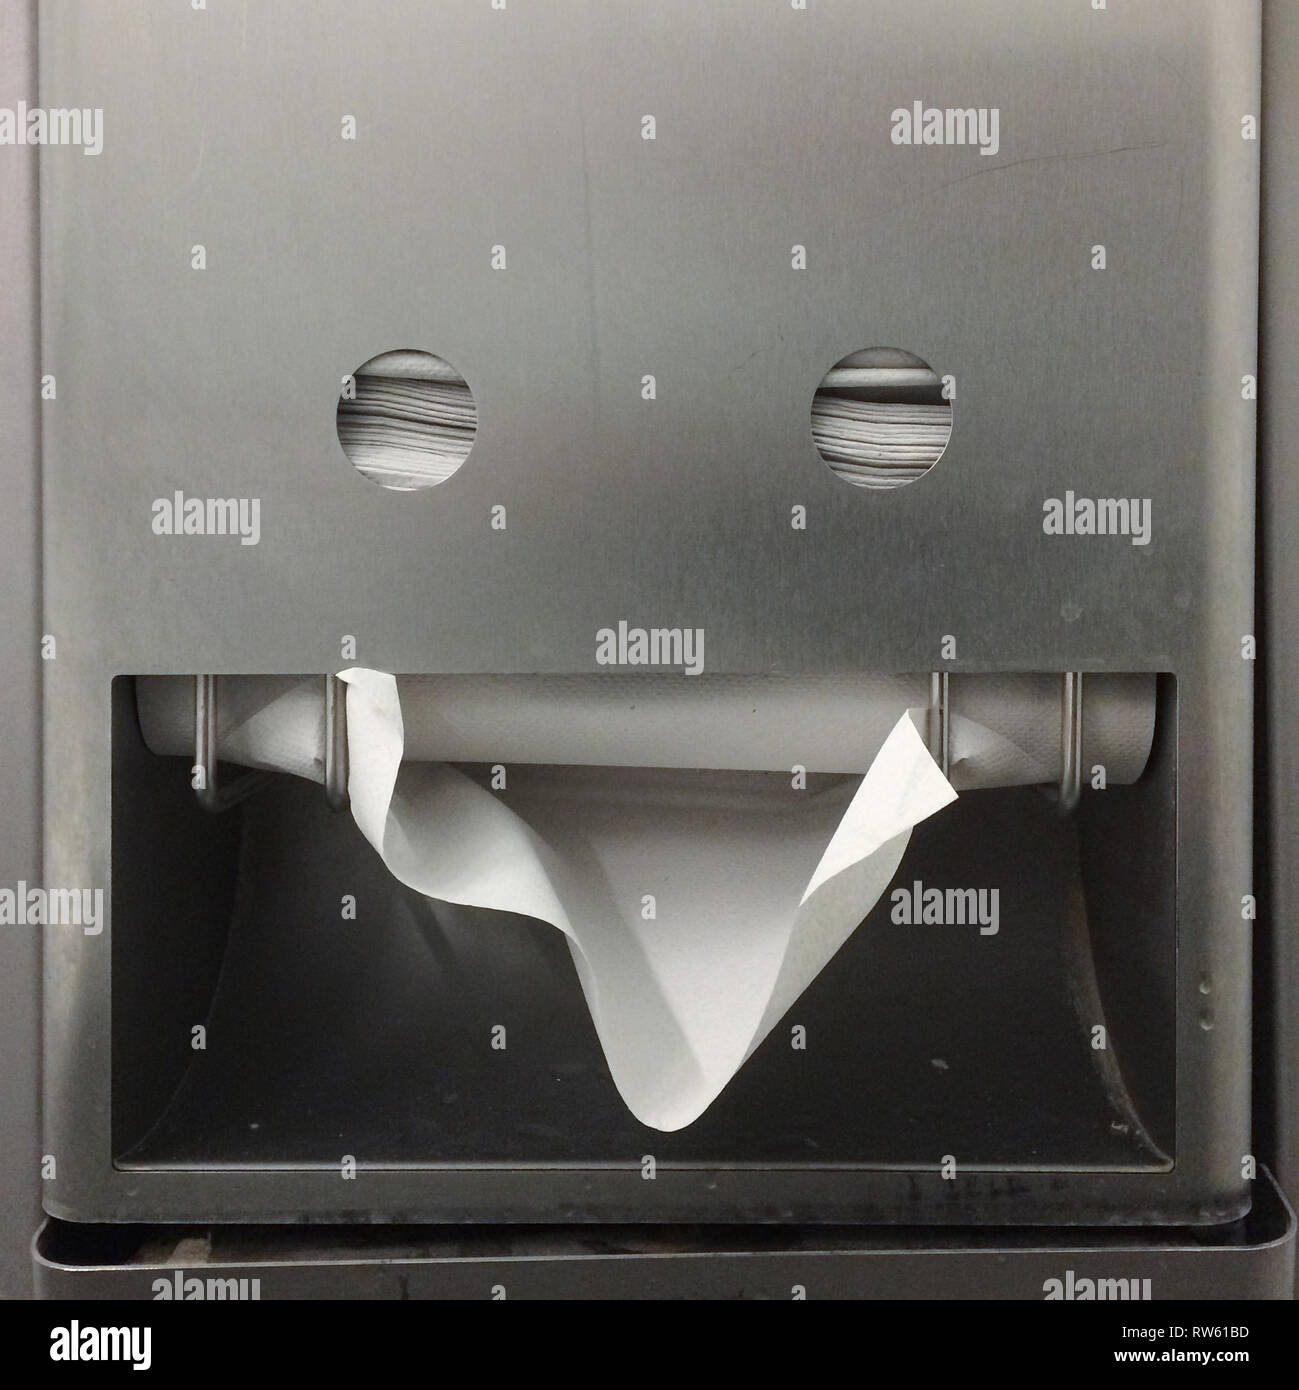 Paper towel holder in the shape of a smiley in a public toilet in the Belvedere Museum in Vienna, Austria. Stock Photo